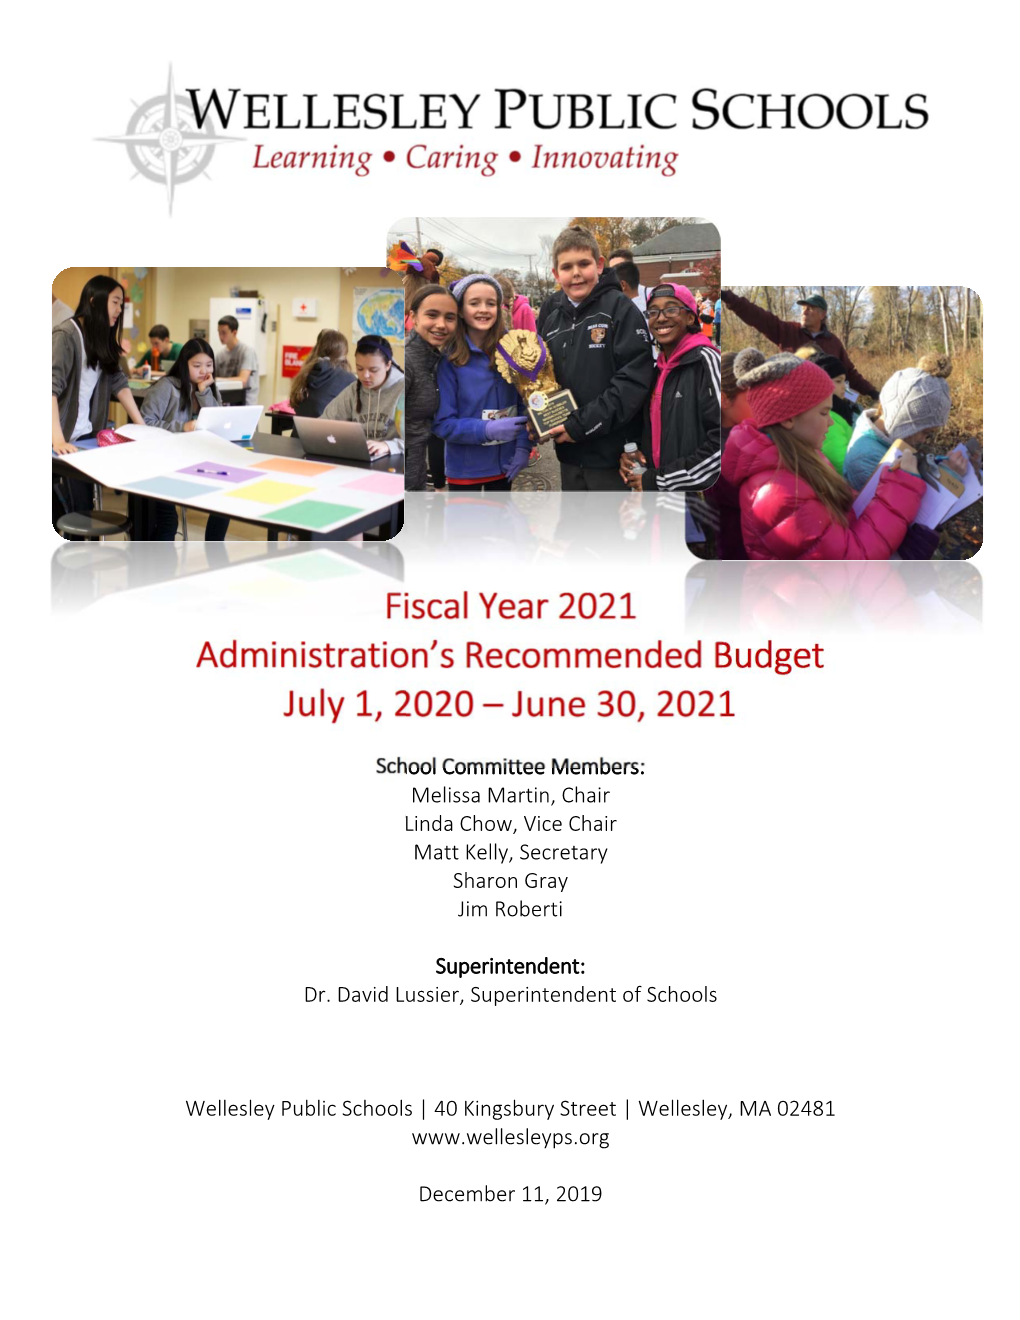 Fiscal Year 2021 Administration's Recommended Budget